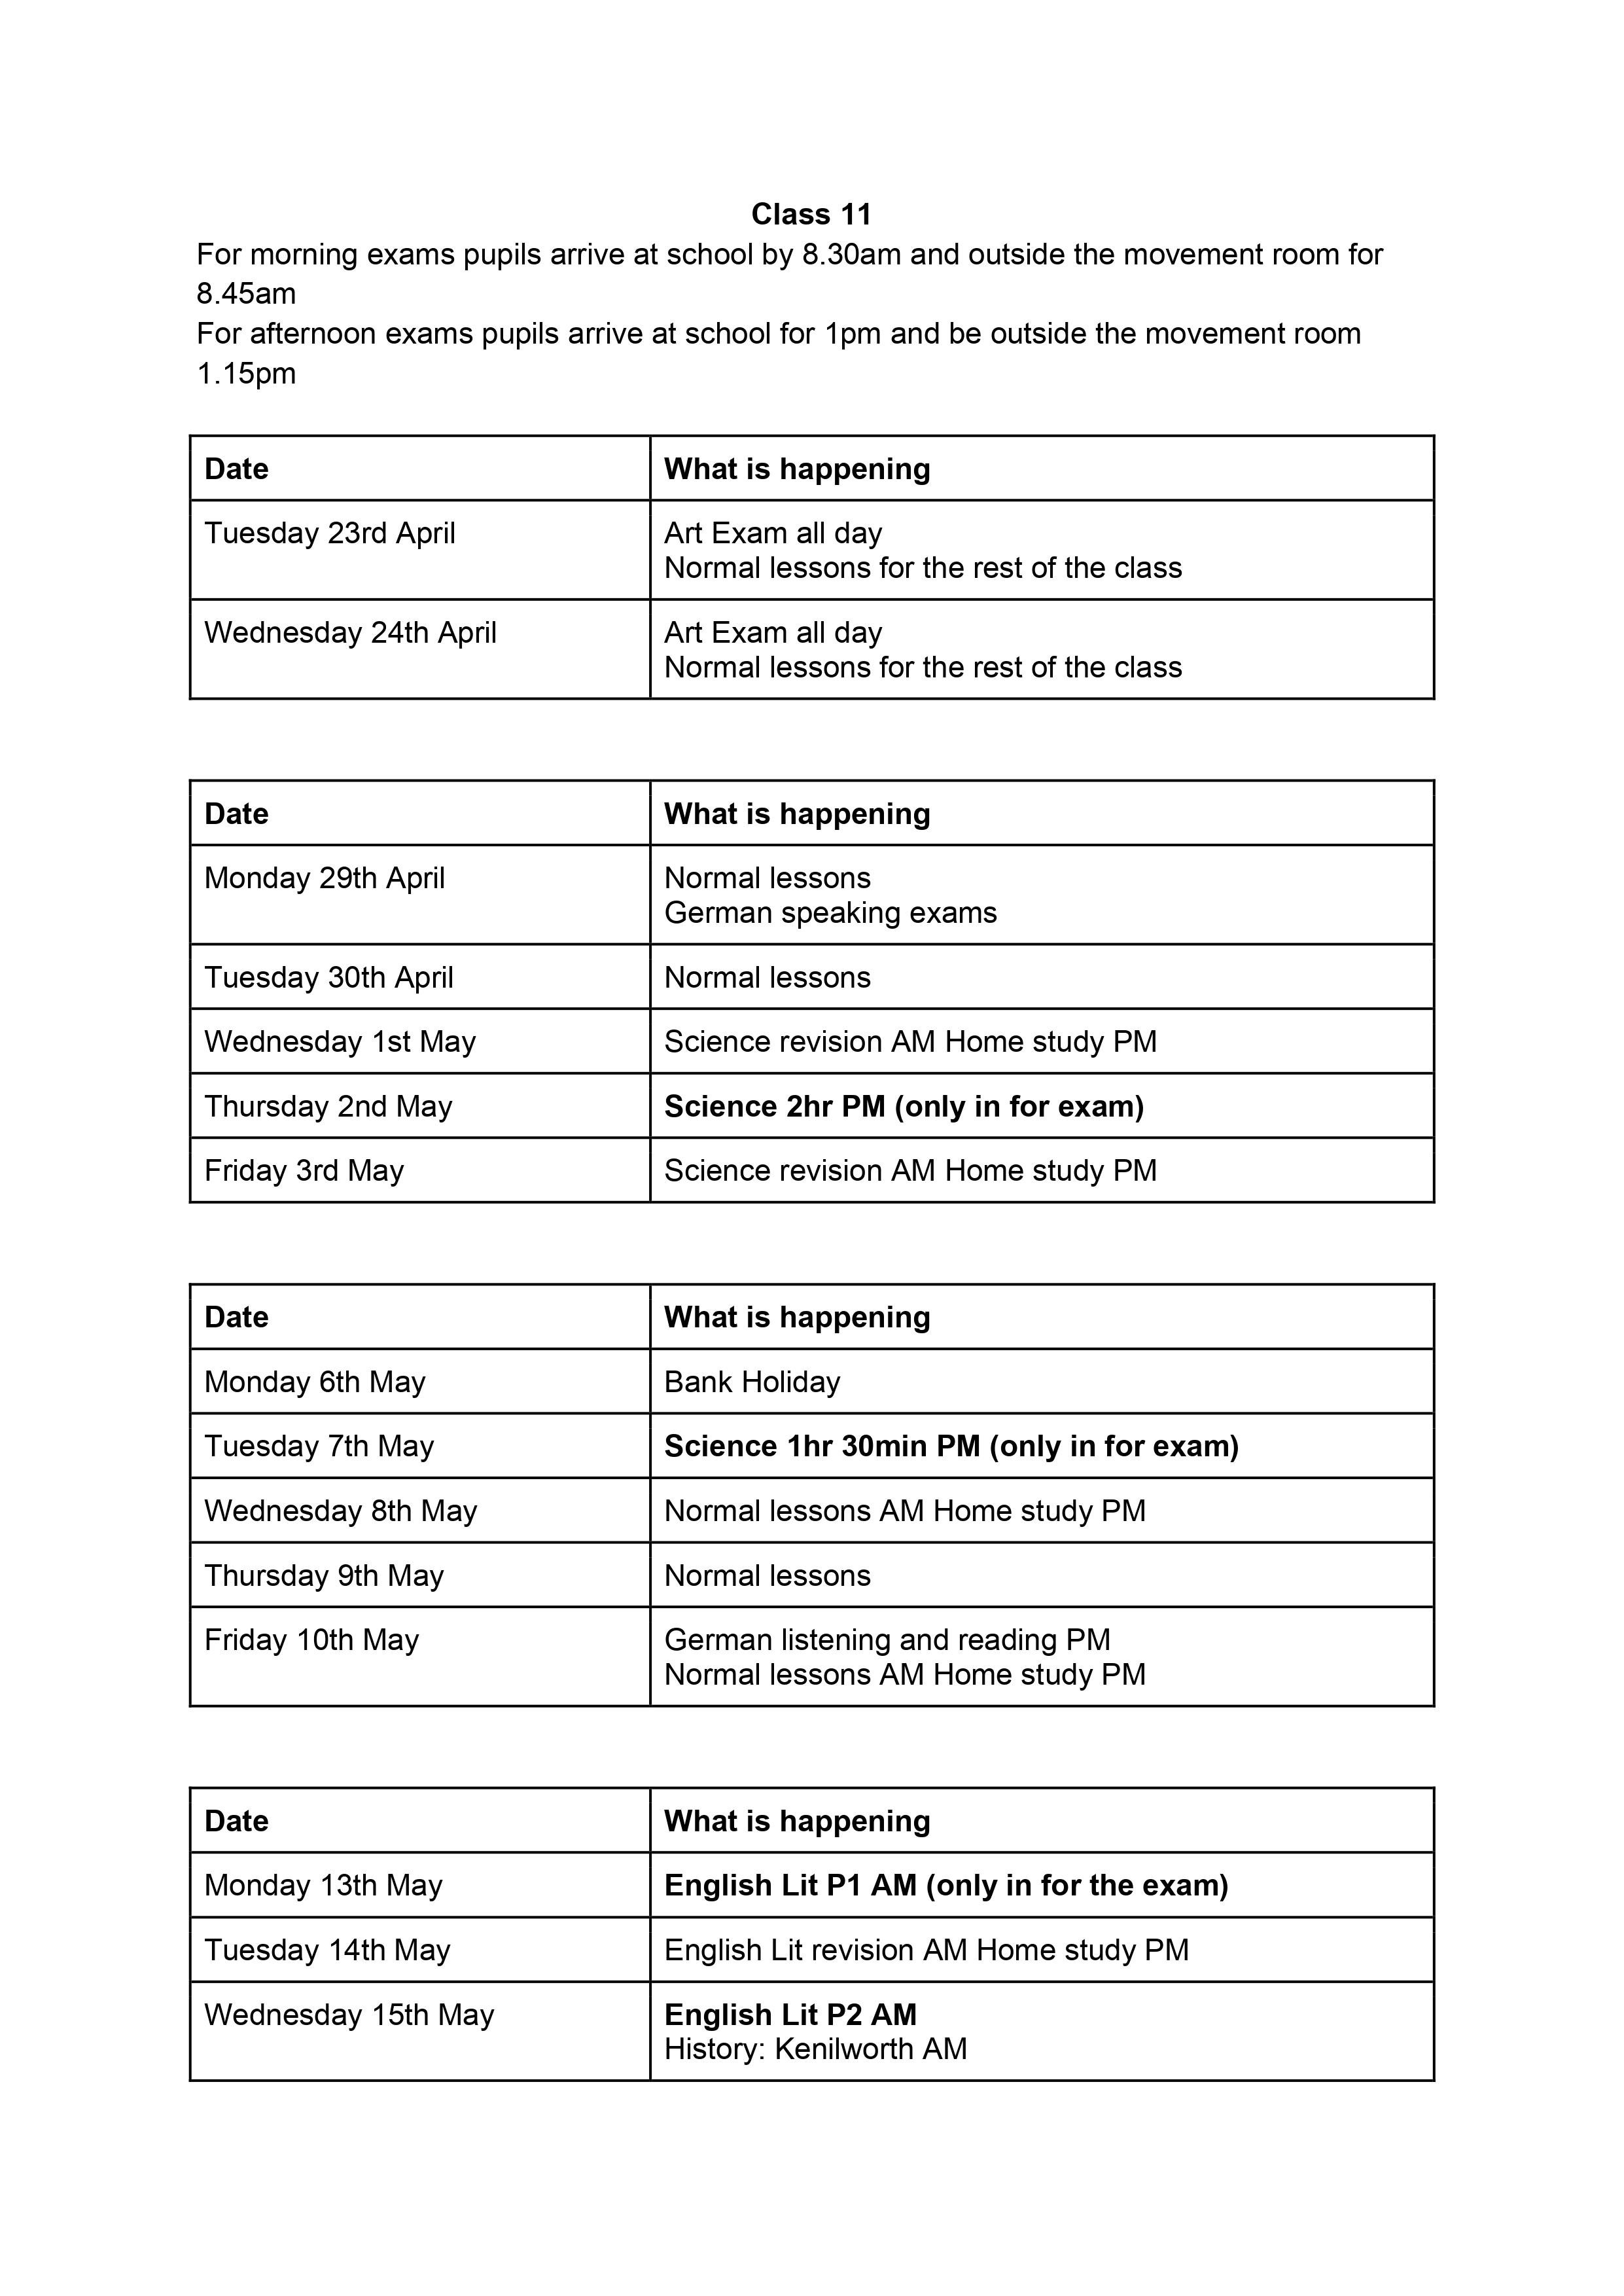 _Class 11 exam_study timetable 24 (1)-images-1.jpg